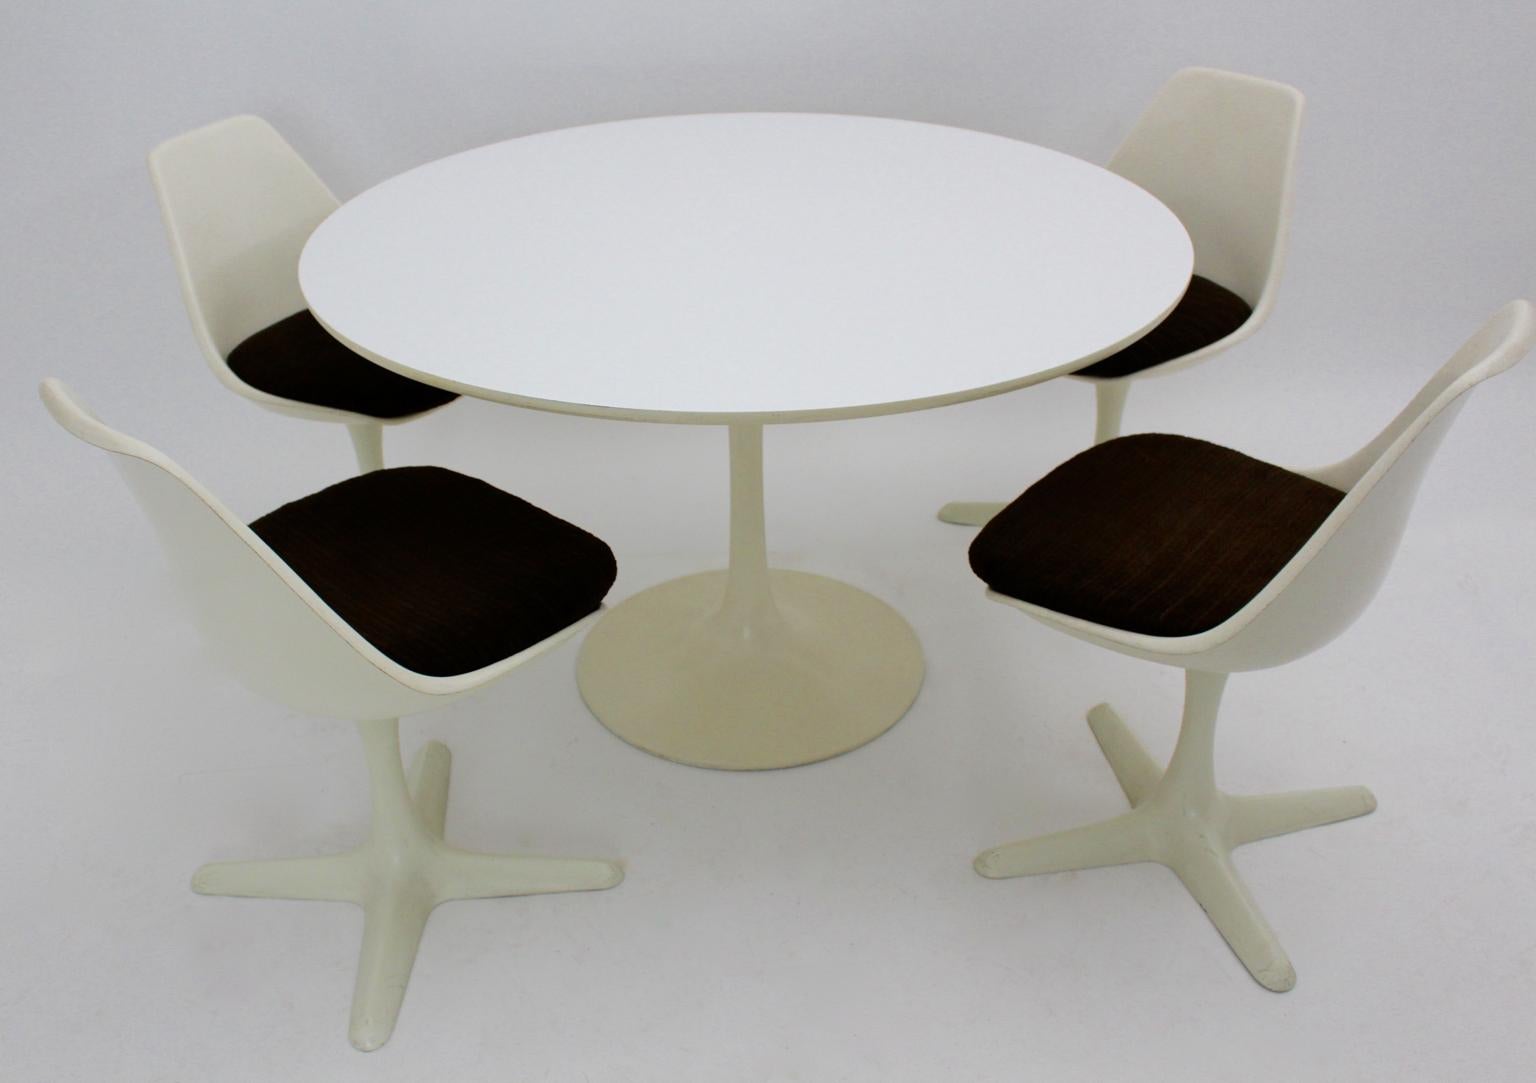 Space age vintage white plastic dining room set designed by Maurice Burke 1960s United Kingdom and produced by Arkana Great Britain.
The dining room set consists of 1 white enameled round table with a white formica table top and four swiveling